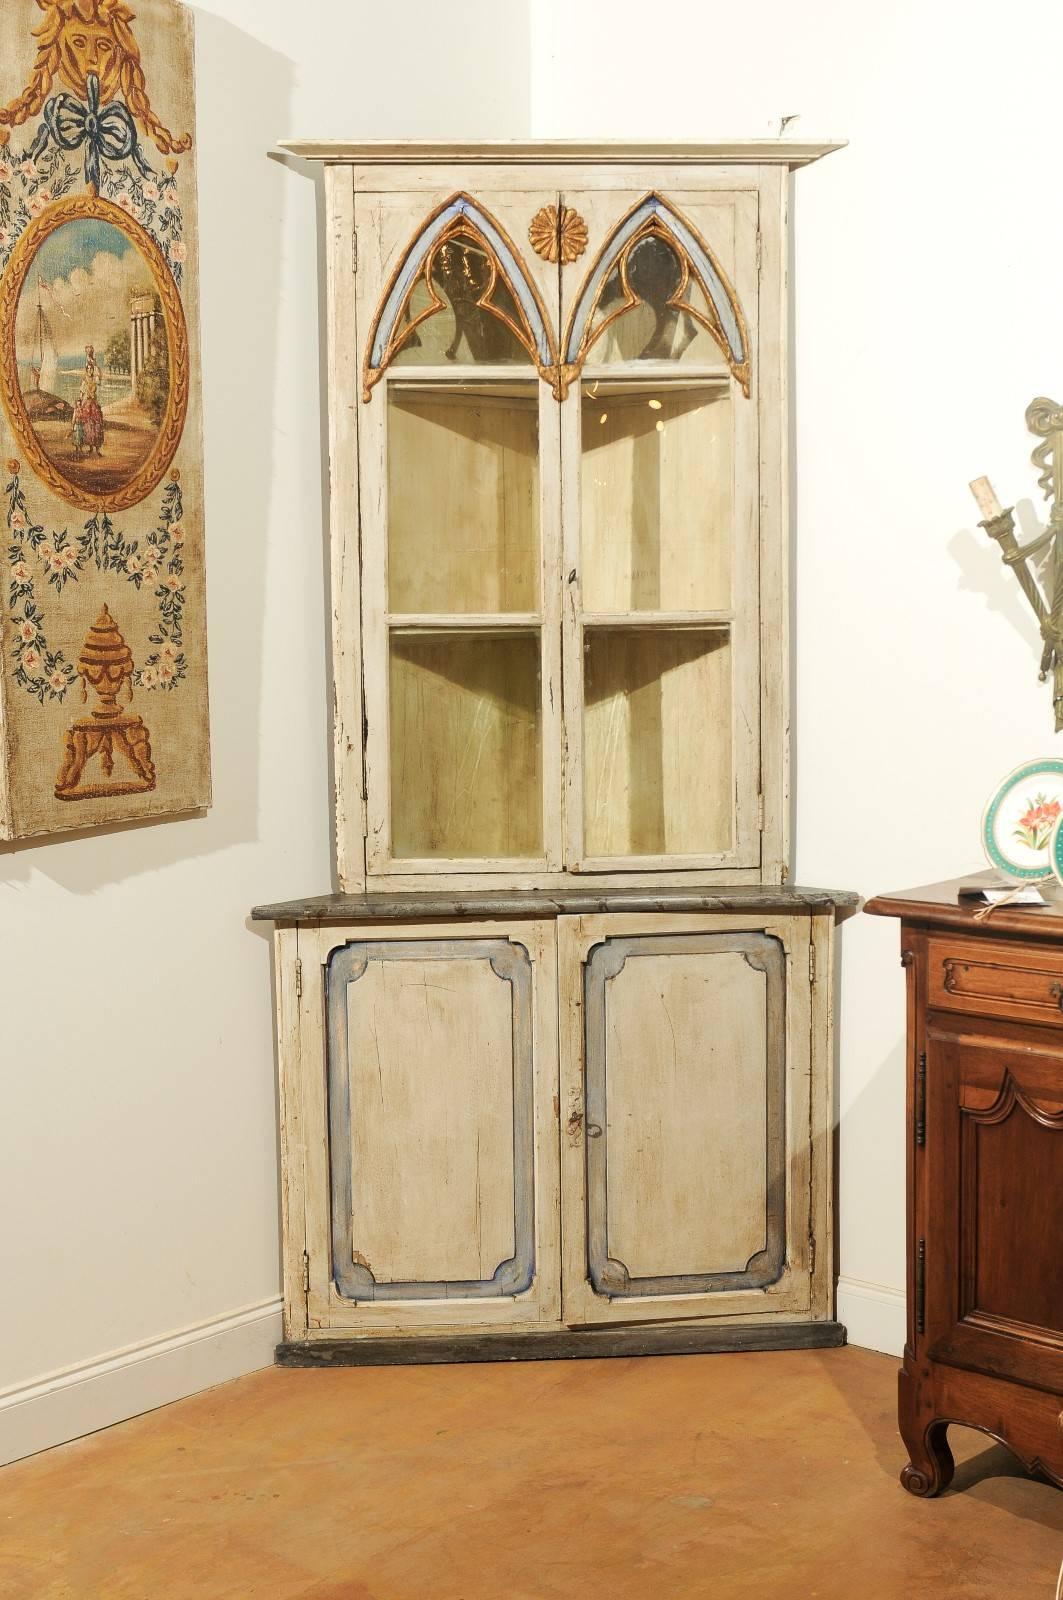 A Swedish Gothic Revival painted wood and glass doors corner cabinet from the mid-19th century. This exquisite Swedish corner cabinet features a molded cornice overhanging two Gothic inspired doors with glass panels. A giltwood rosette, carved onto